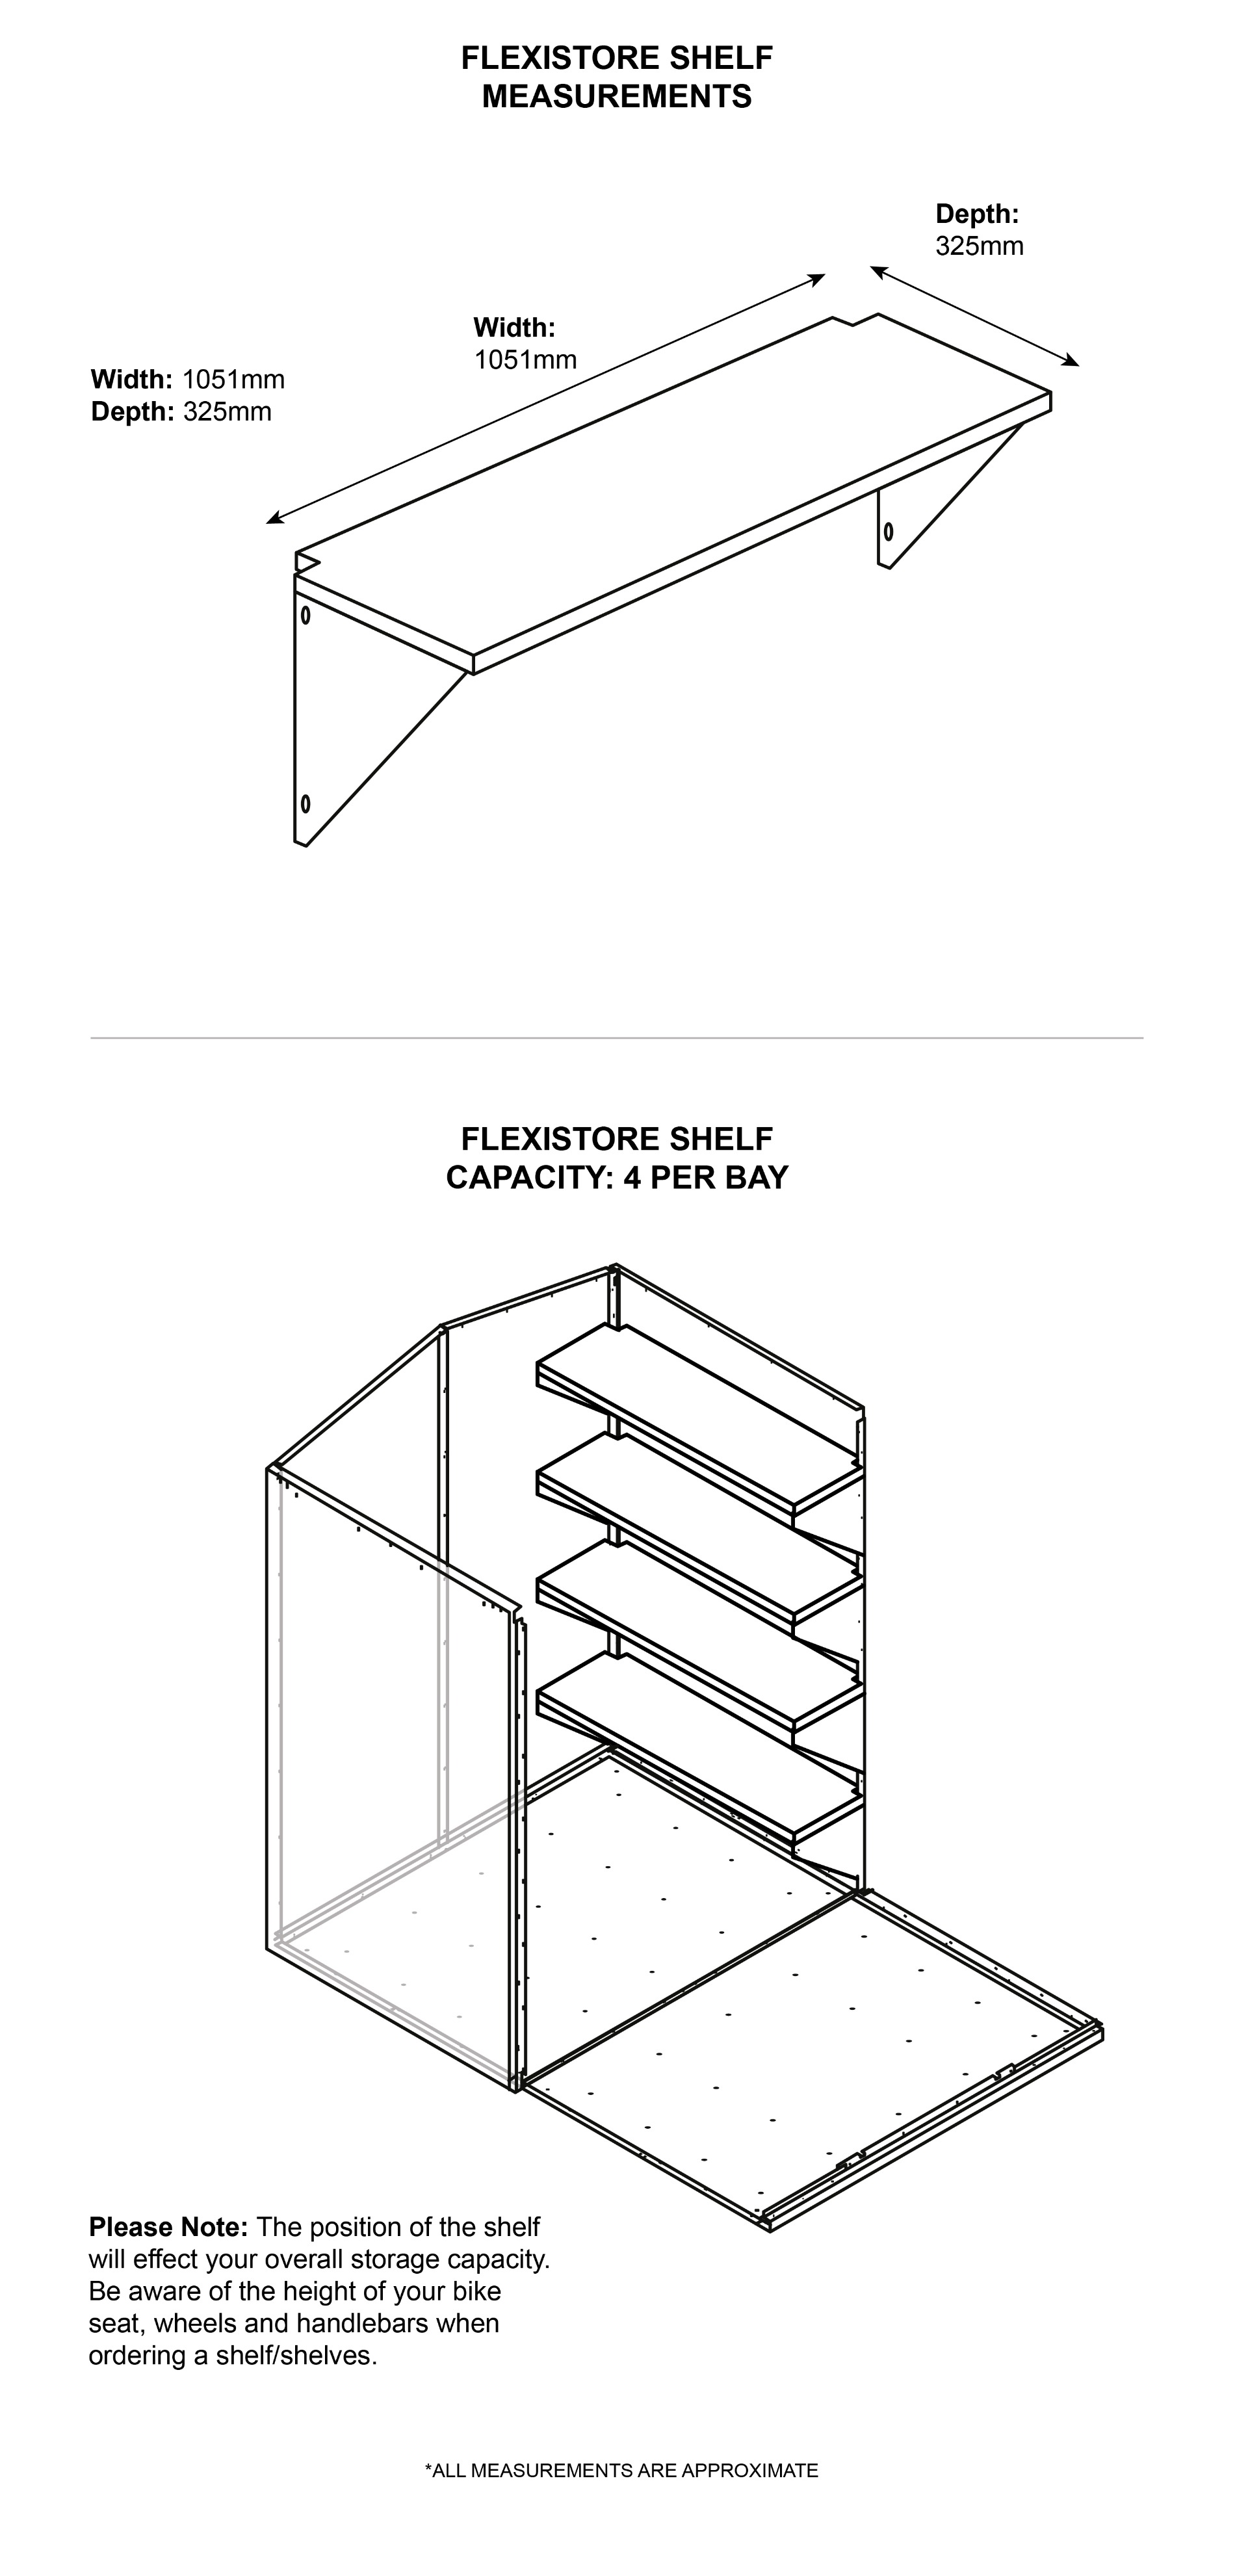 Easy fit metal shelves from Asgard